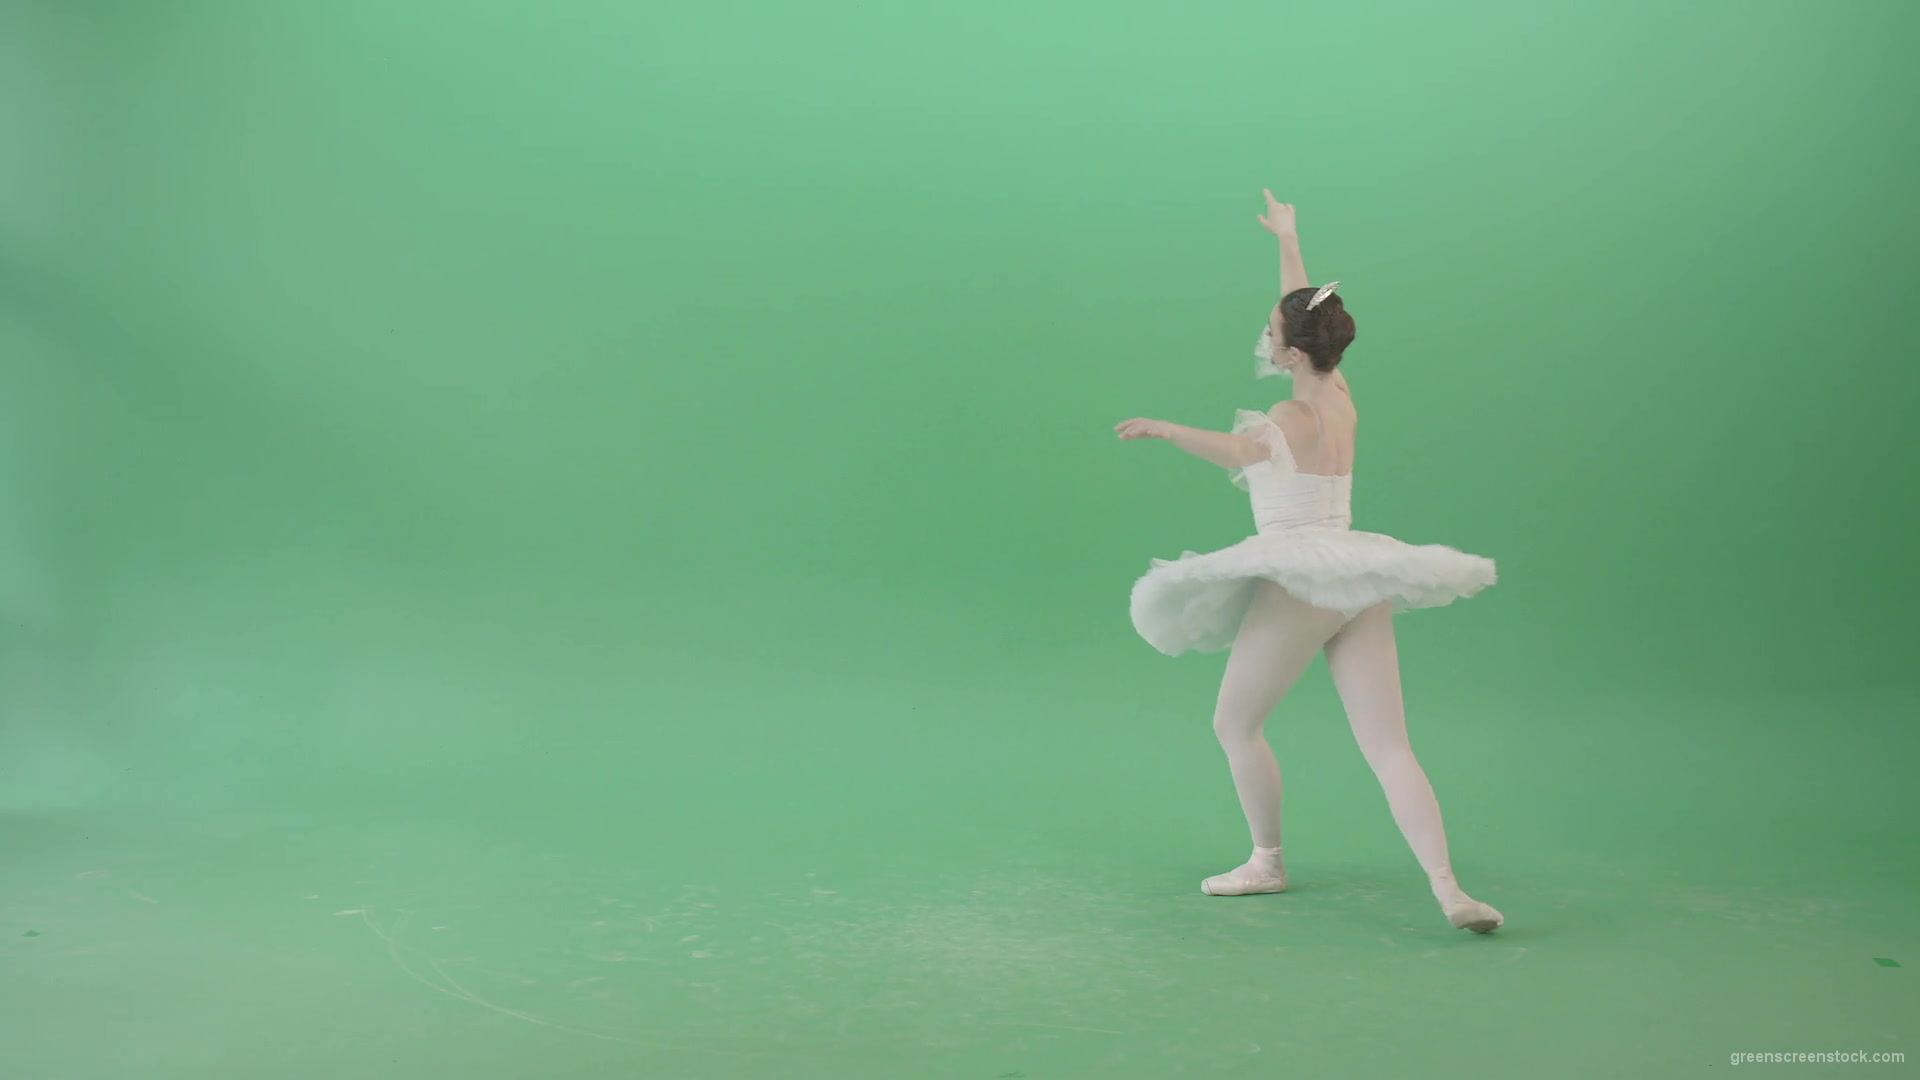 Amazing-Flowing-dance-by-Ballerina-ballet-girl-looking-for-Corona-Virus-isolated-on-Green-Screen-Viral-4K-Video-Footage-1920_006 Green Screen Stock